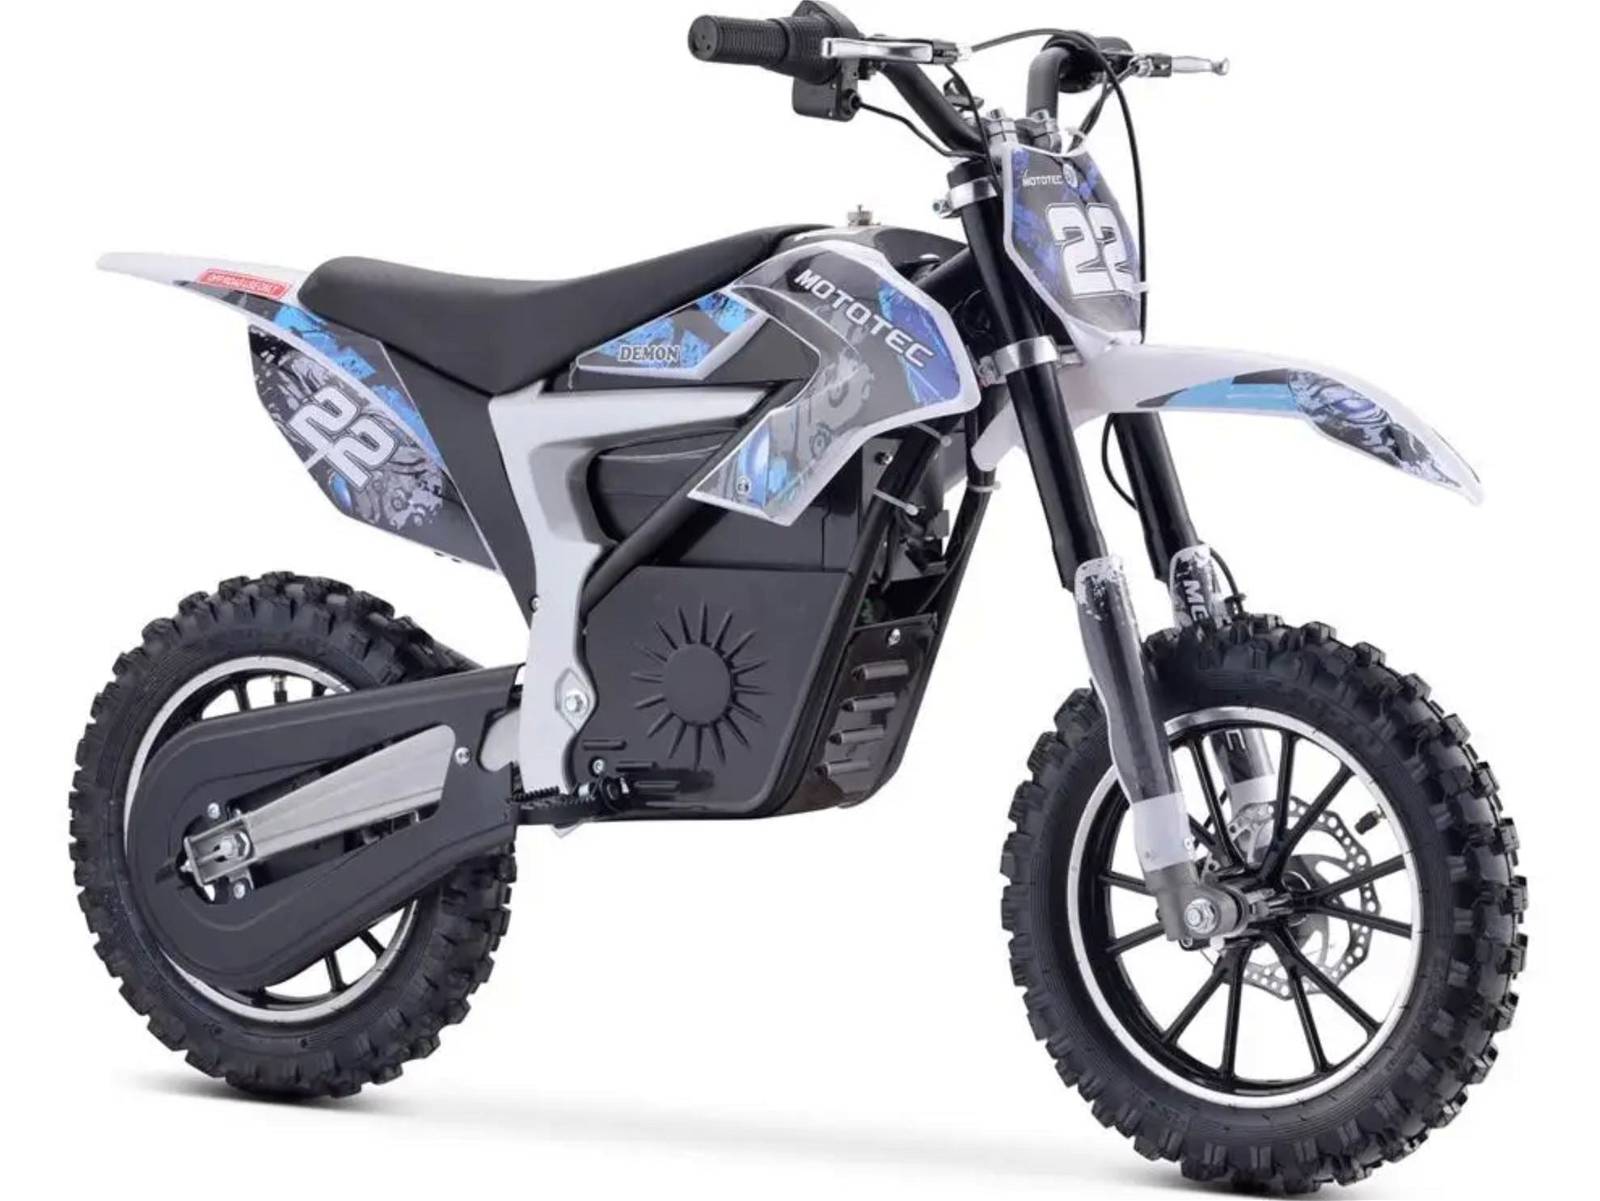 Electric Dirt Bikes for Kids: Safety and Fun for Young Riders